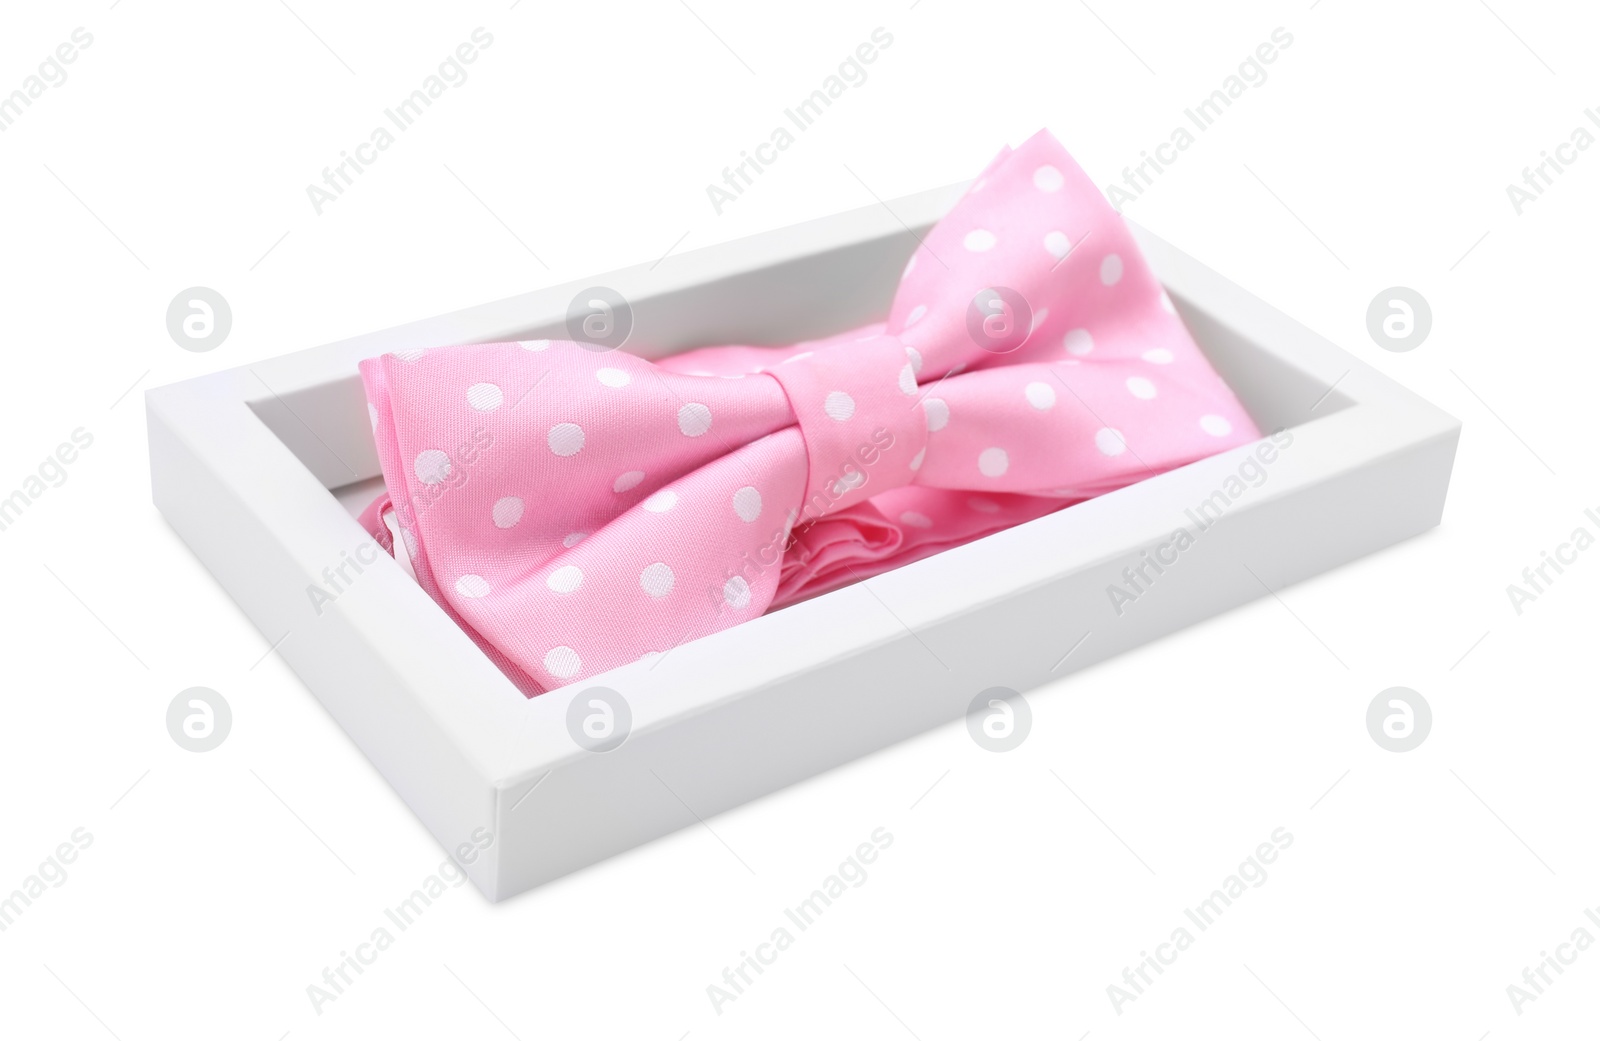 Photo of Stylish pink bow tie with polka dot pattern on white background